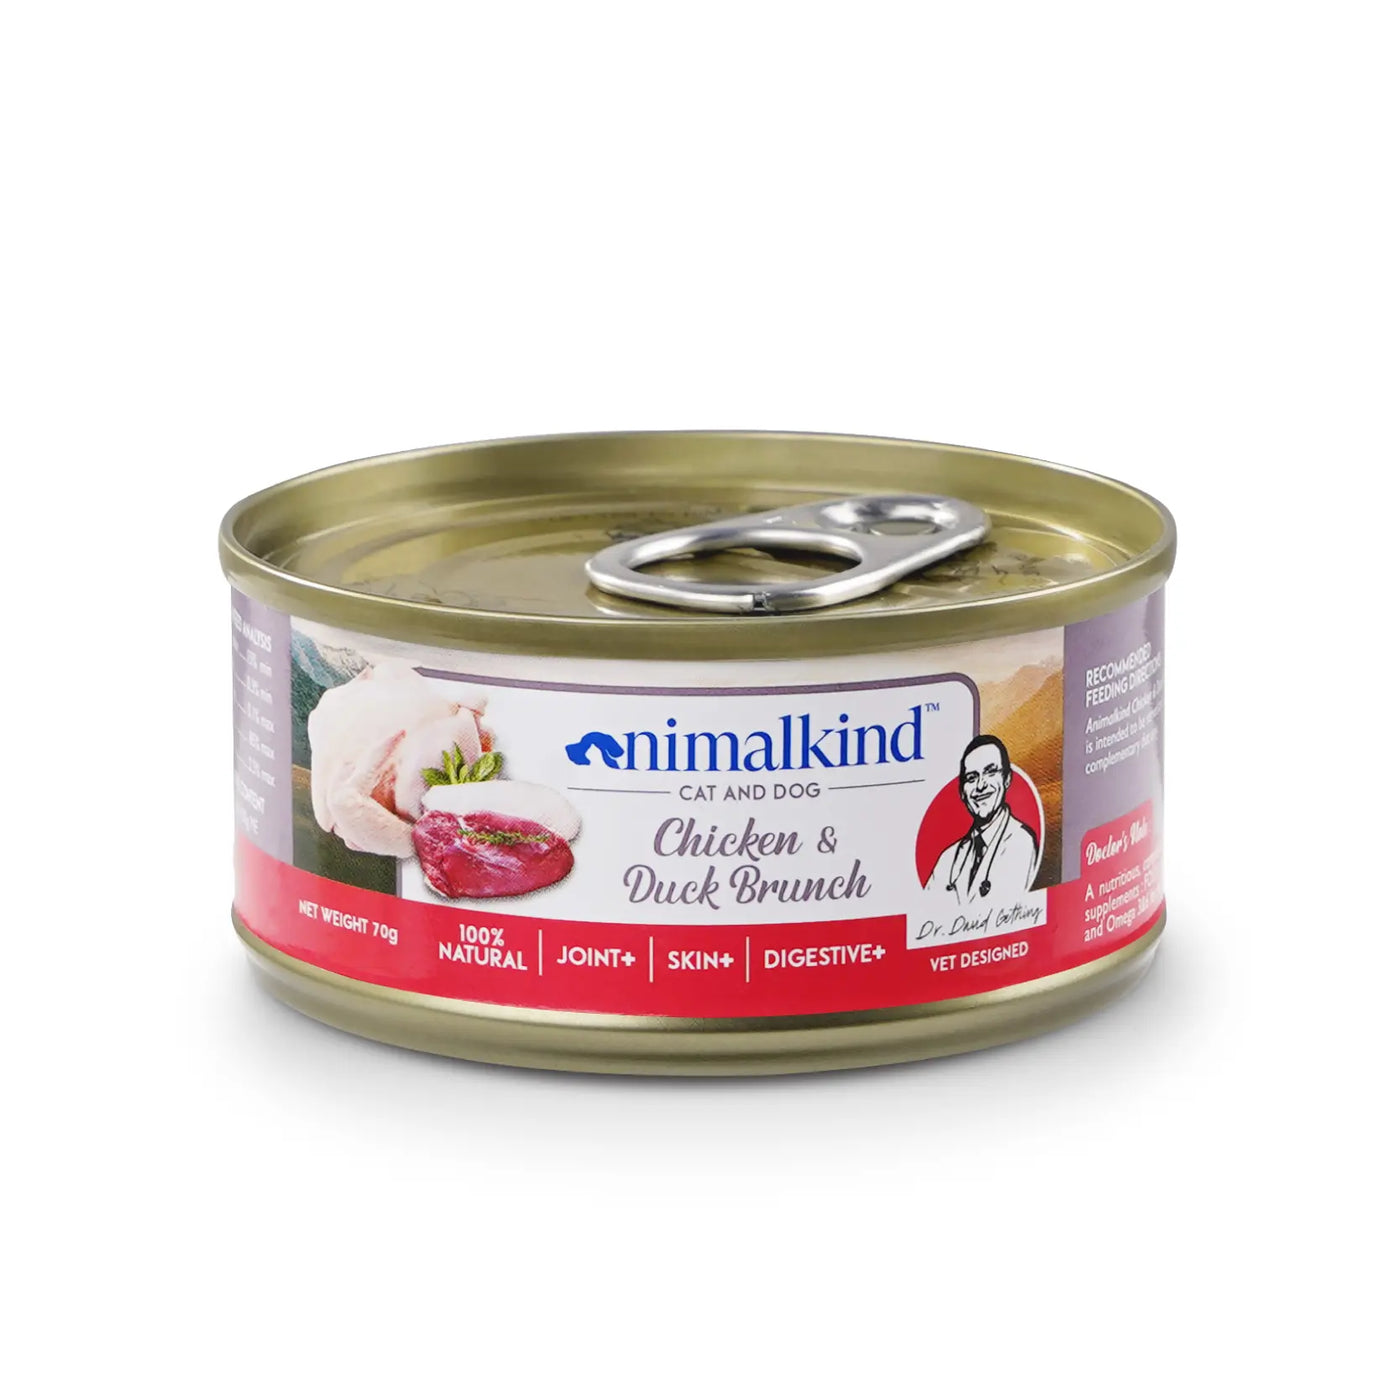 Animalkind Chicken & Duck Brunch Cans for Cats & Dogs